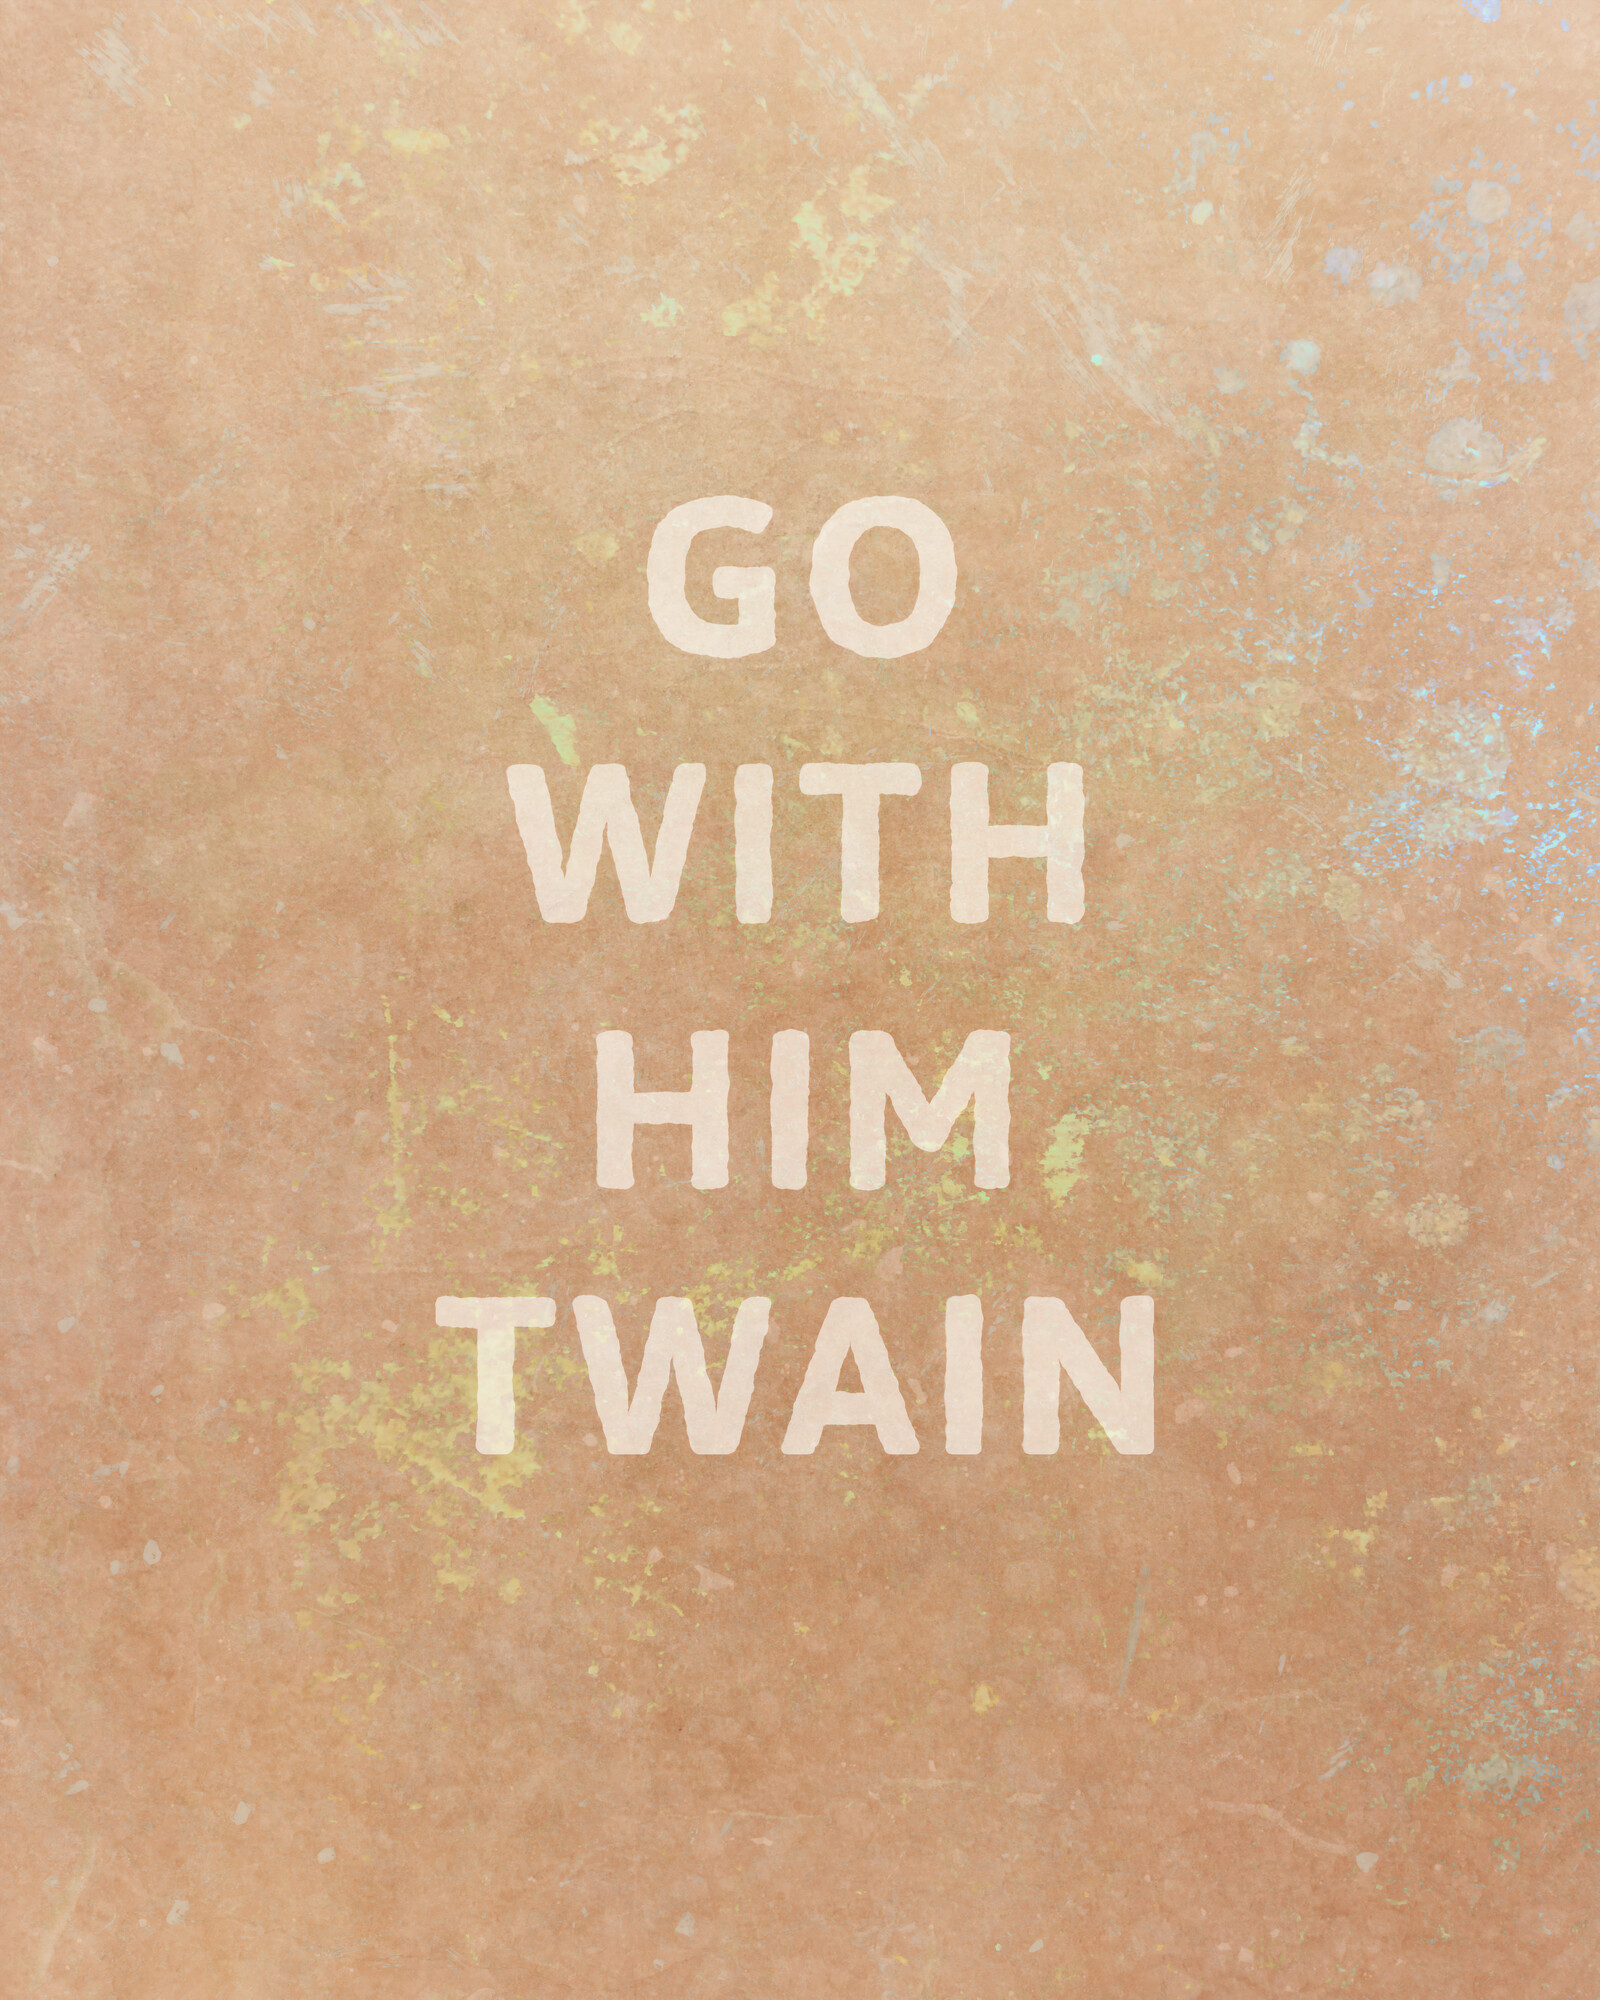 Art with the words "Go with him twain" laid out vertically